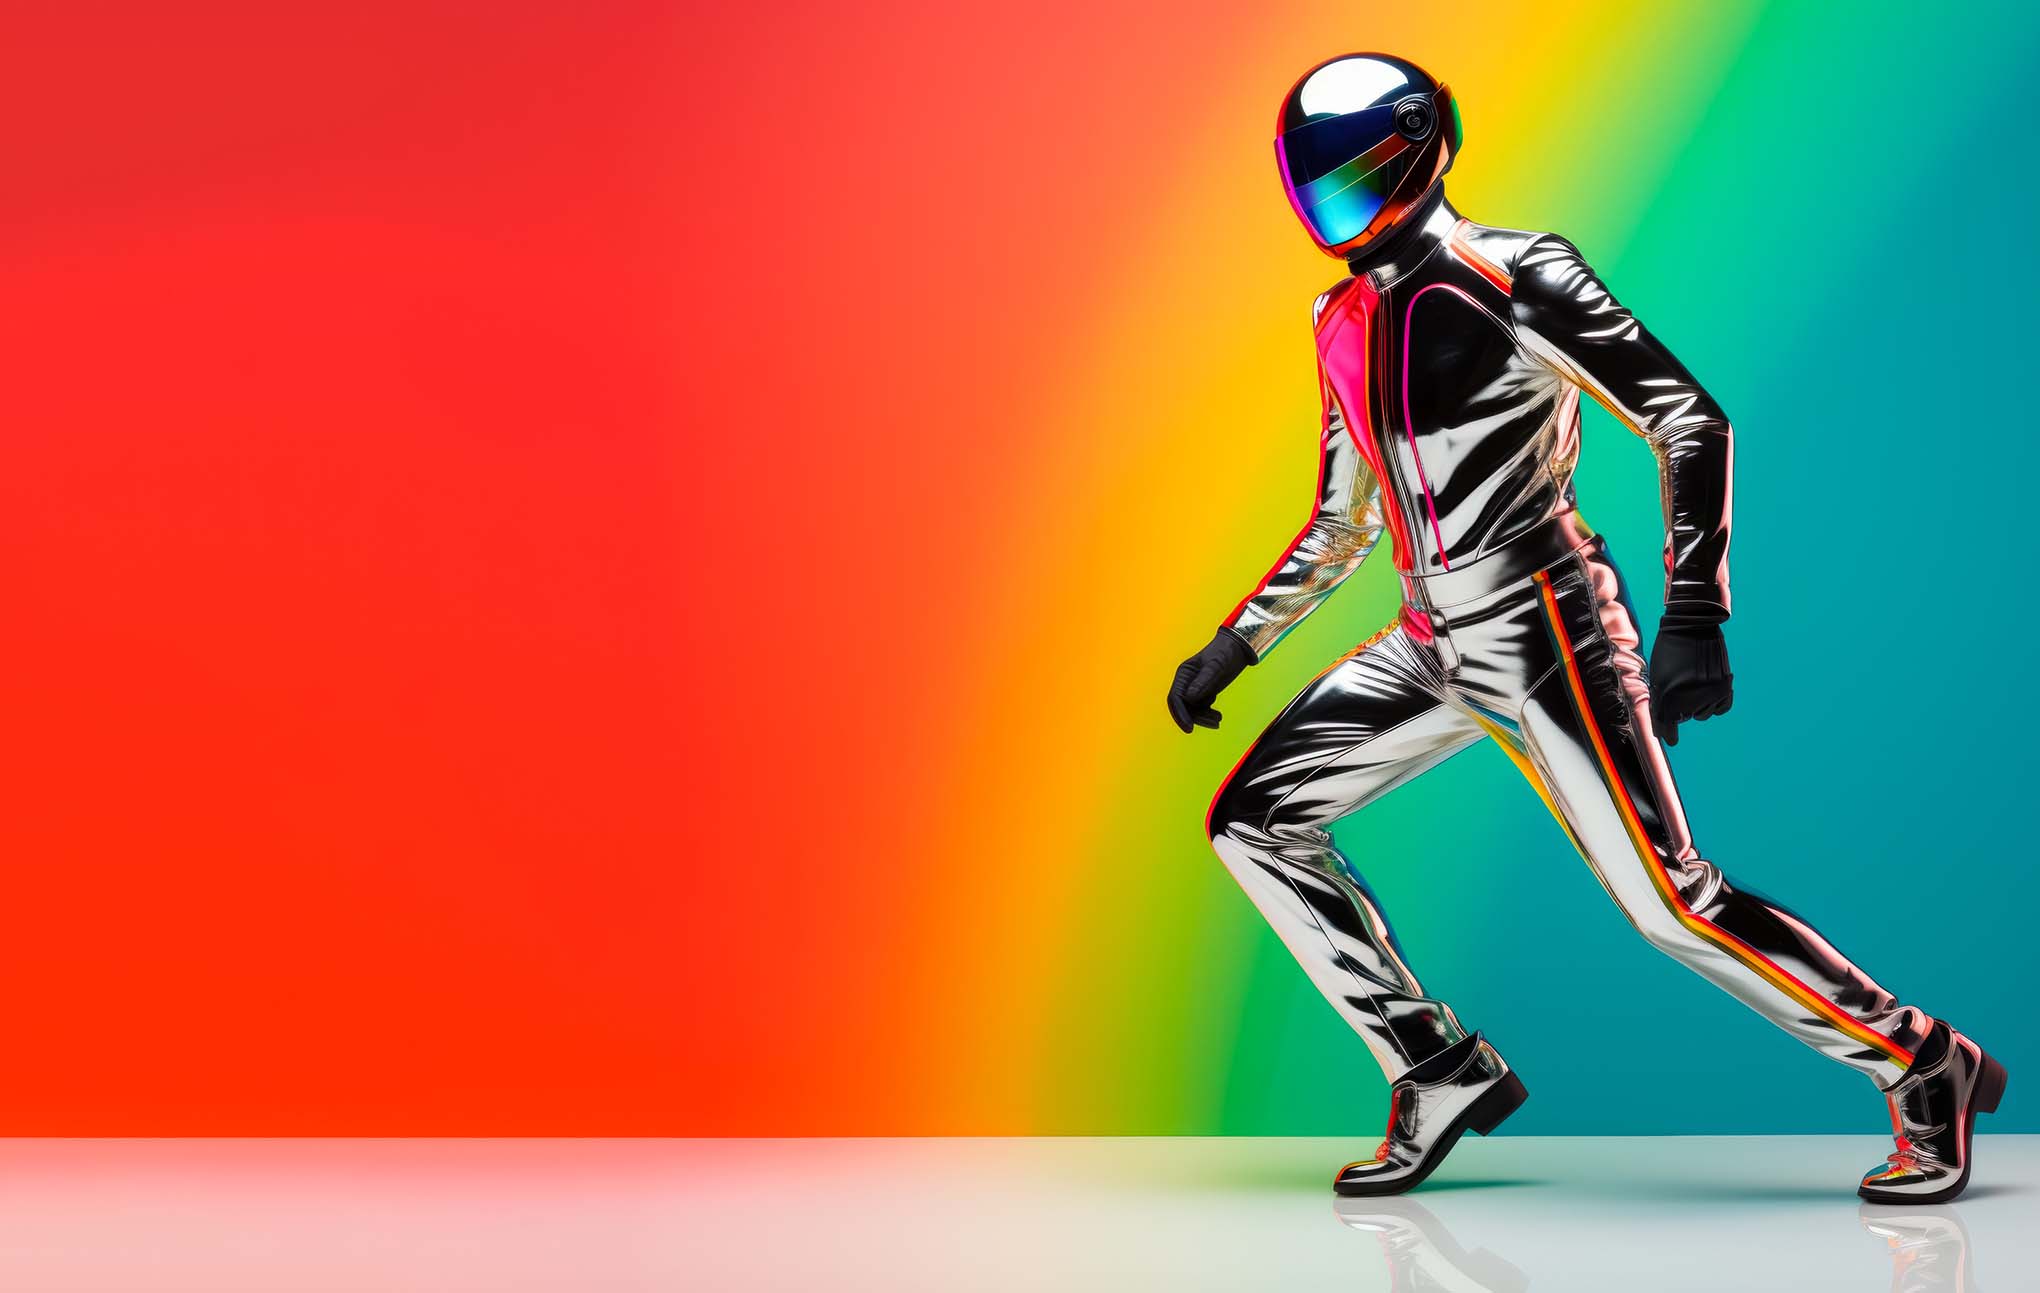 A person in a futuristic reflective silver spacesuit and a helmet with a colorful, iridescent visor is posing with one leg bent forward on a gradient background transitioning from red to green.